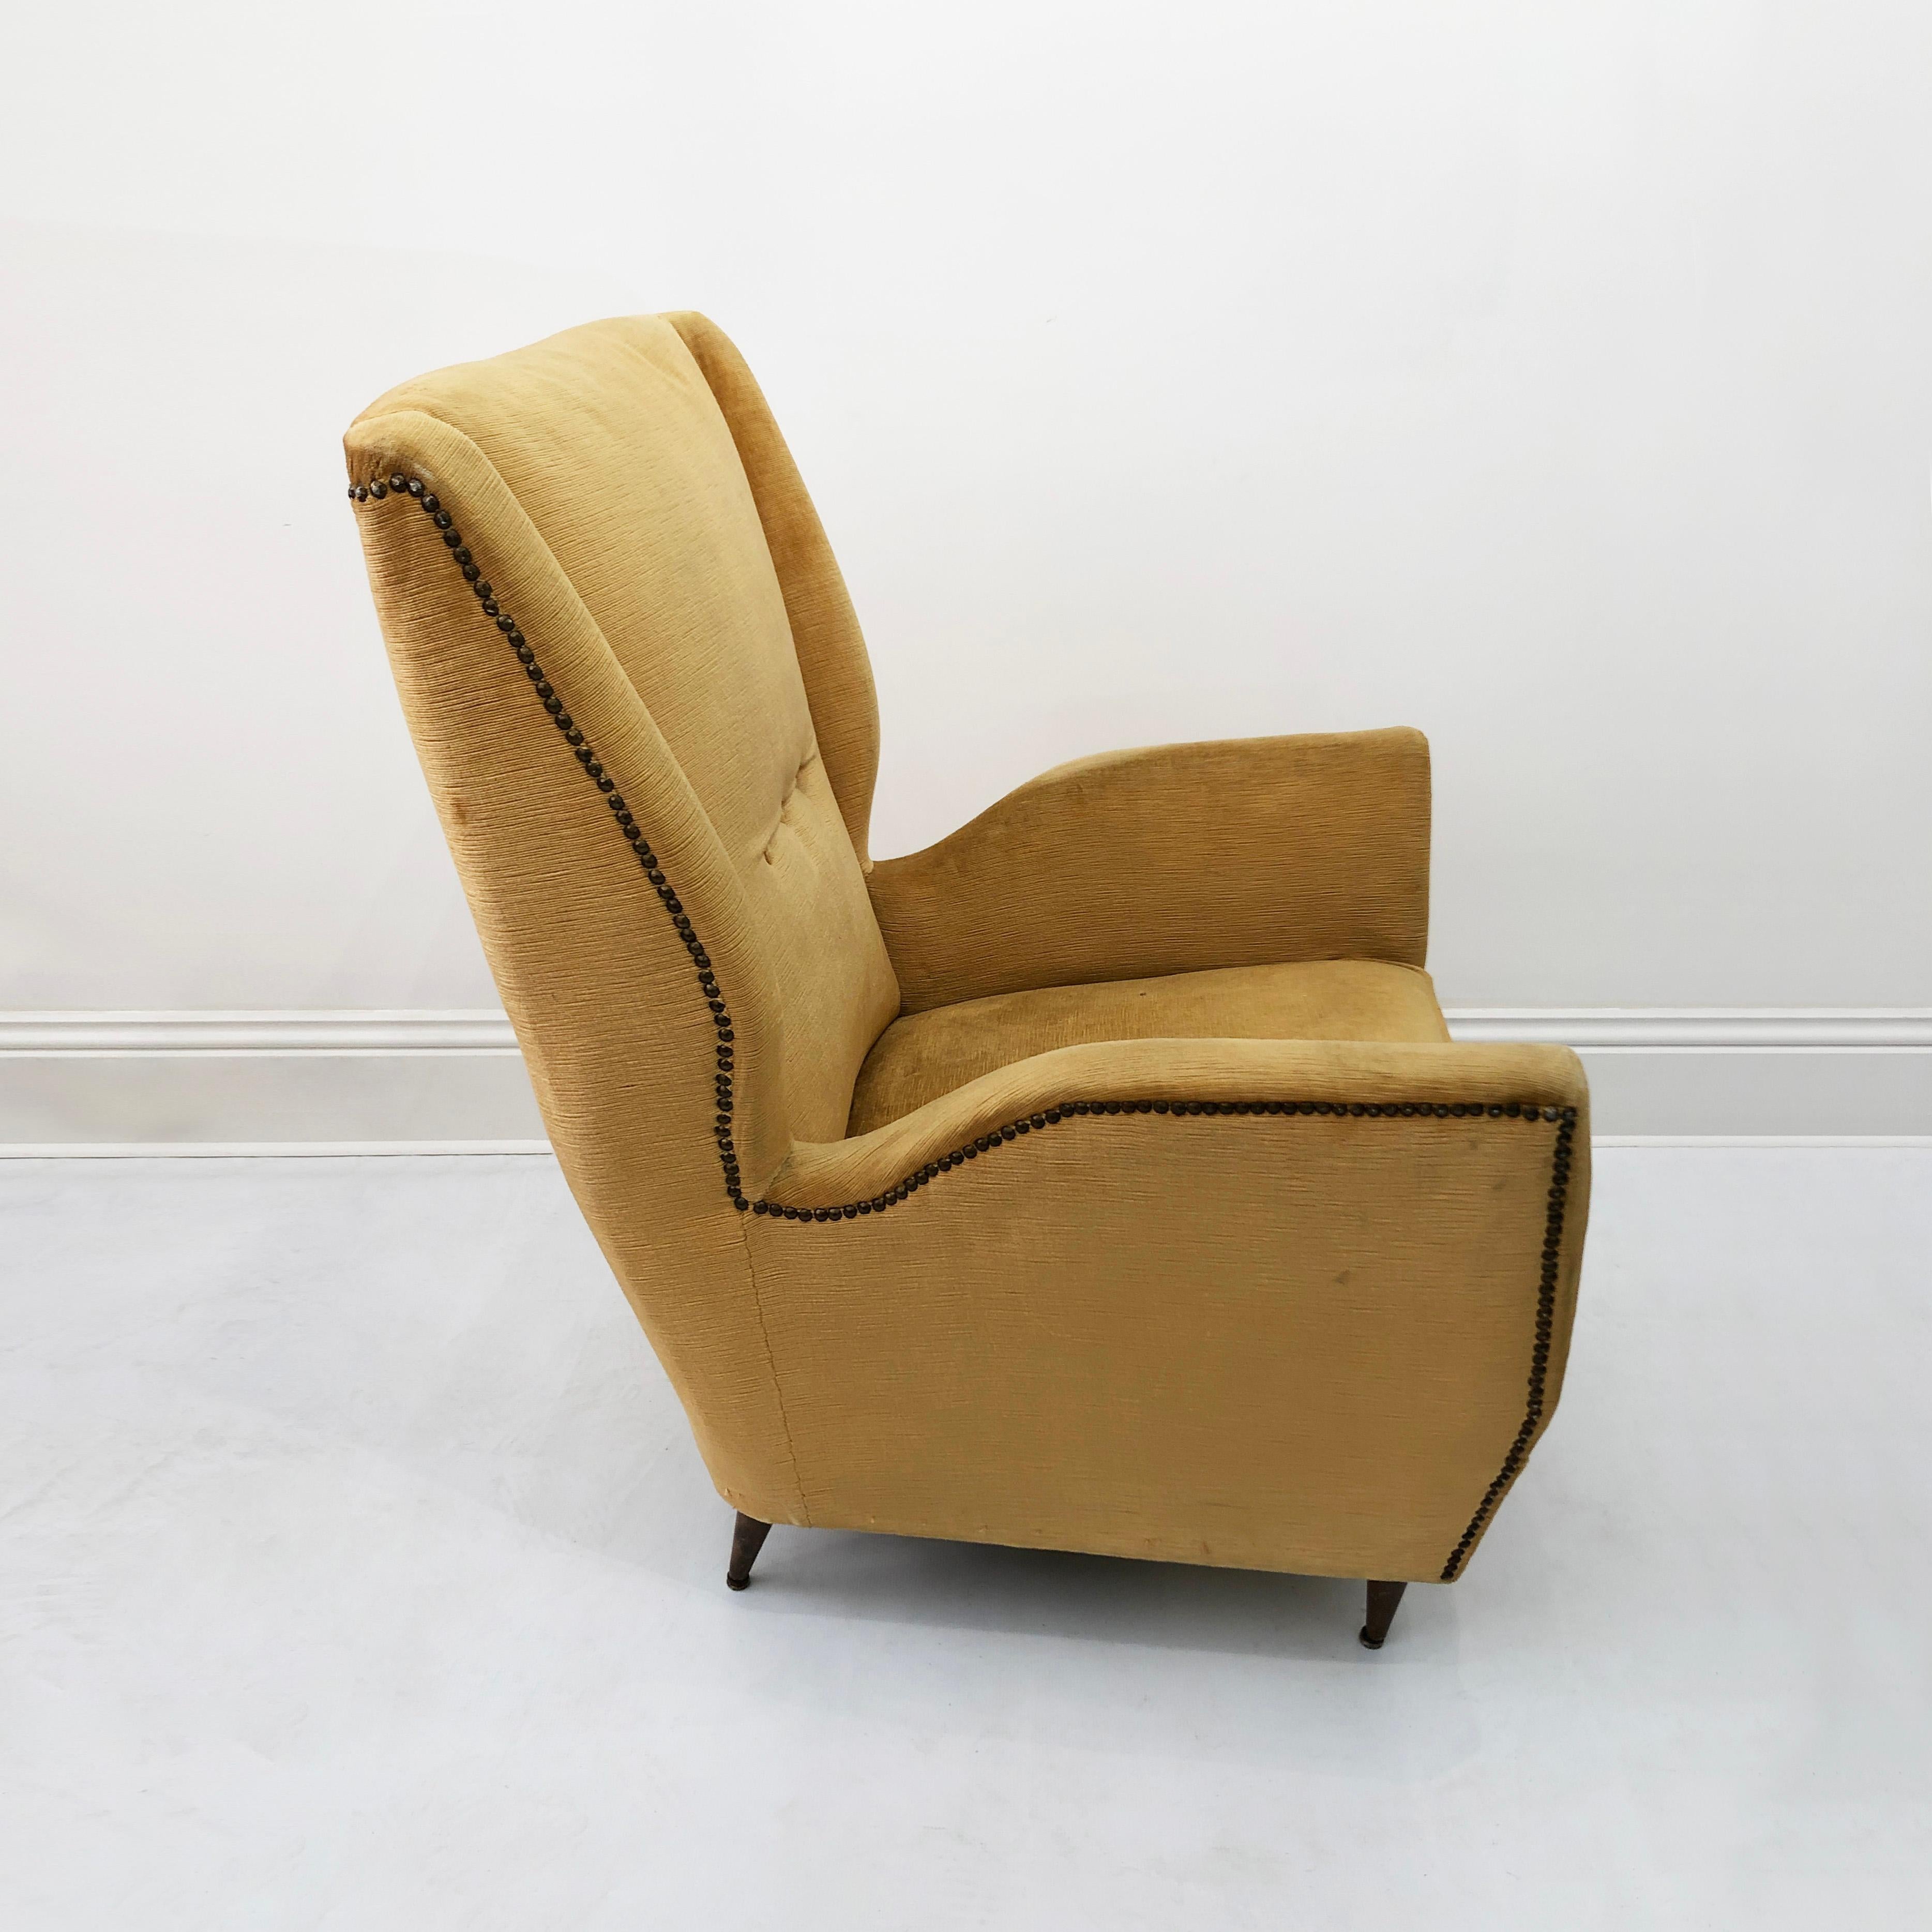 Gio Ponti For I.S.A Wingback Armchair, 1950s Midcentury For Sale 1